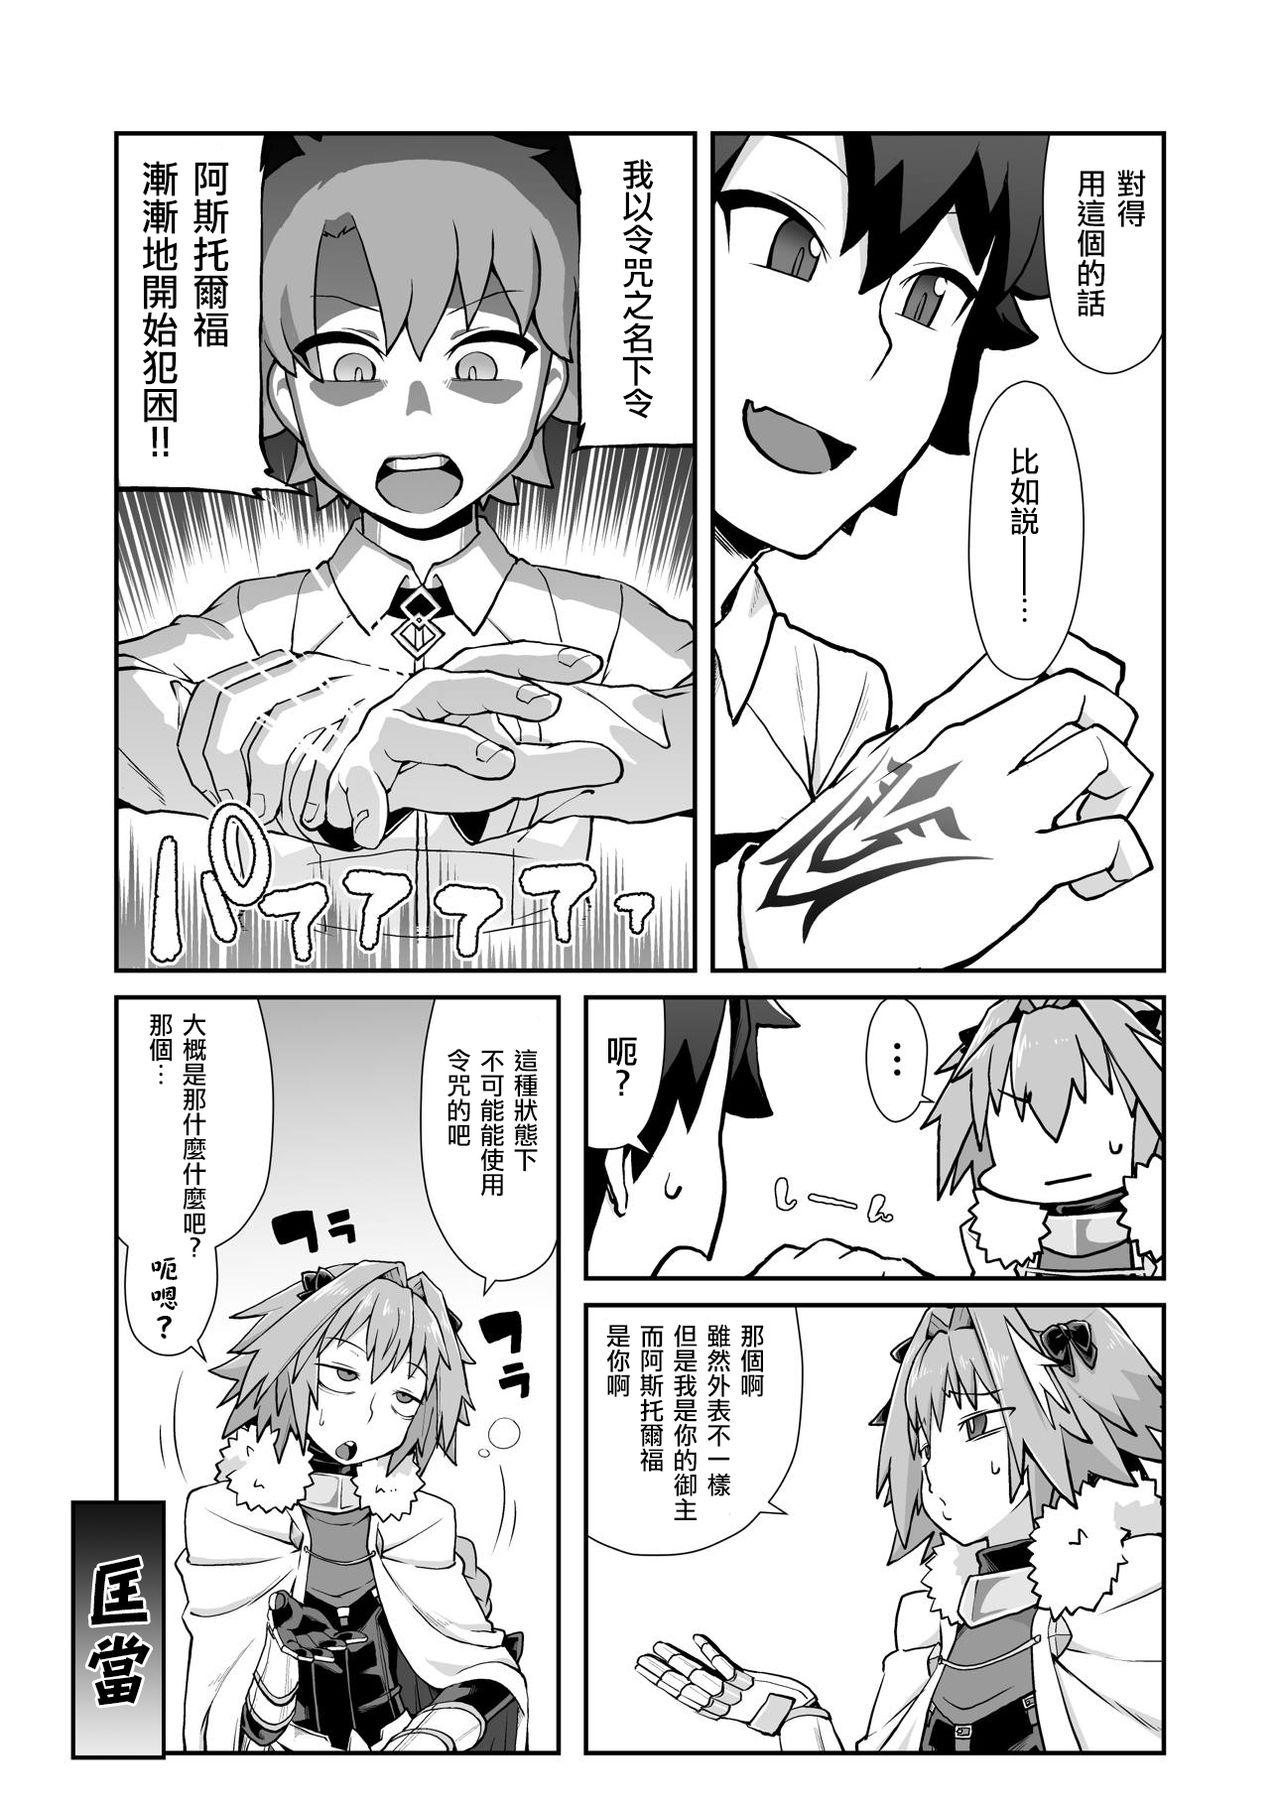 Oral Sex Master Change - Fate grand order  - Page 6